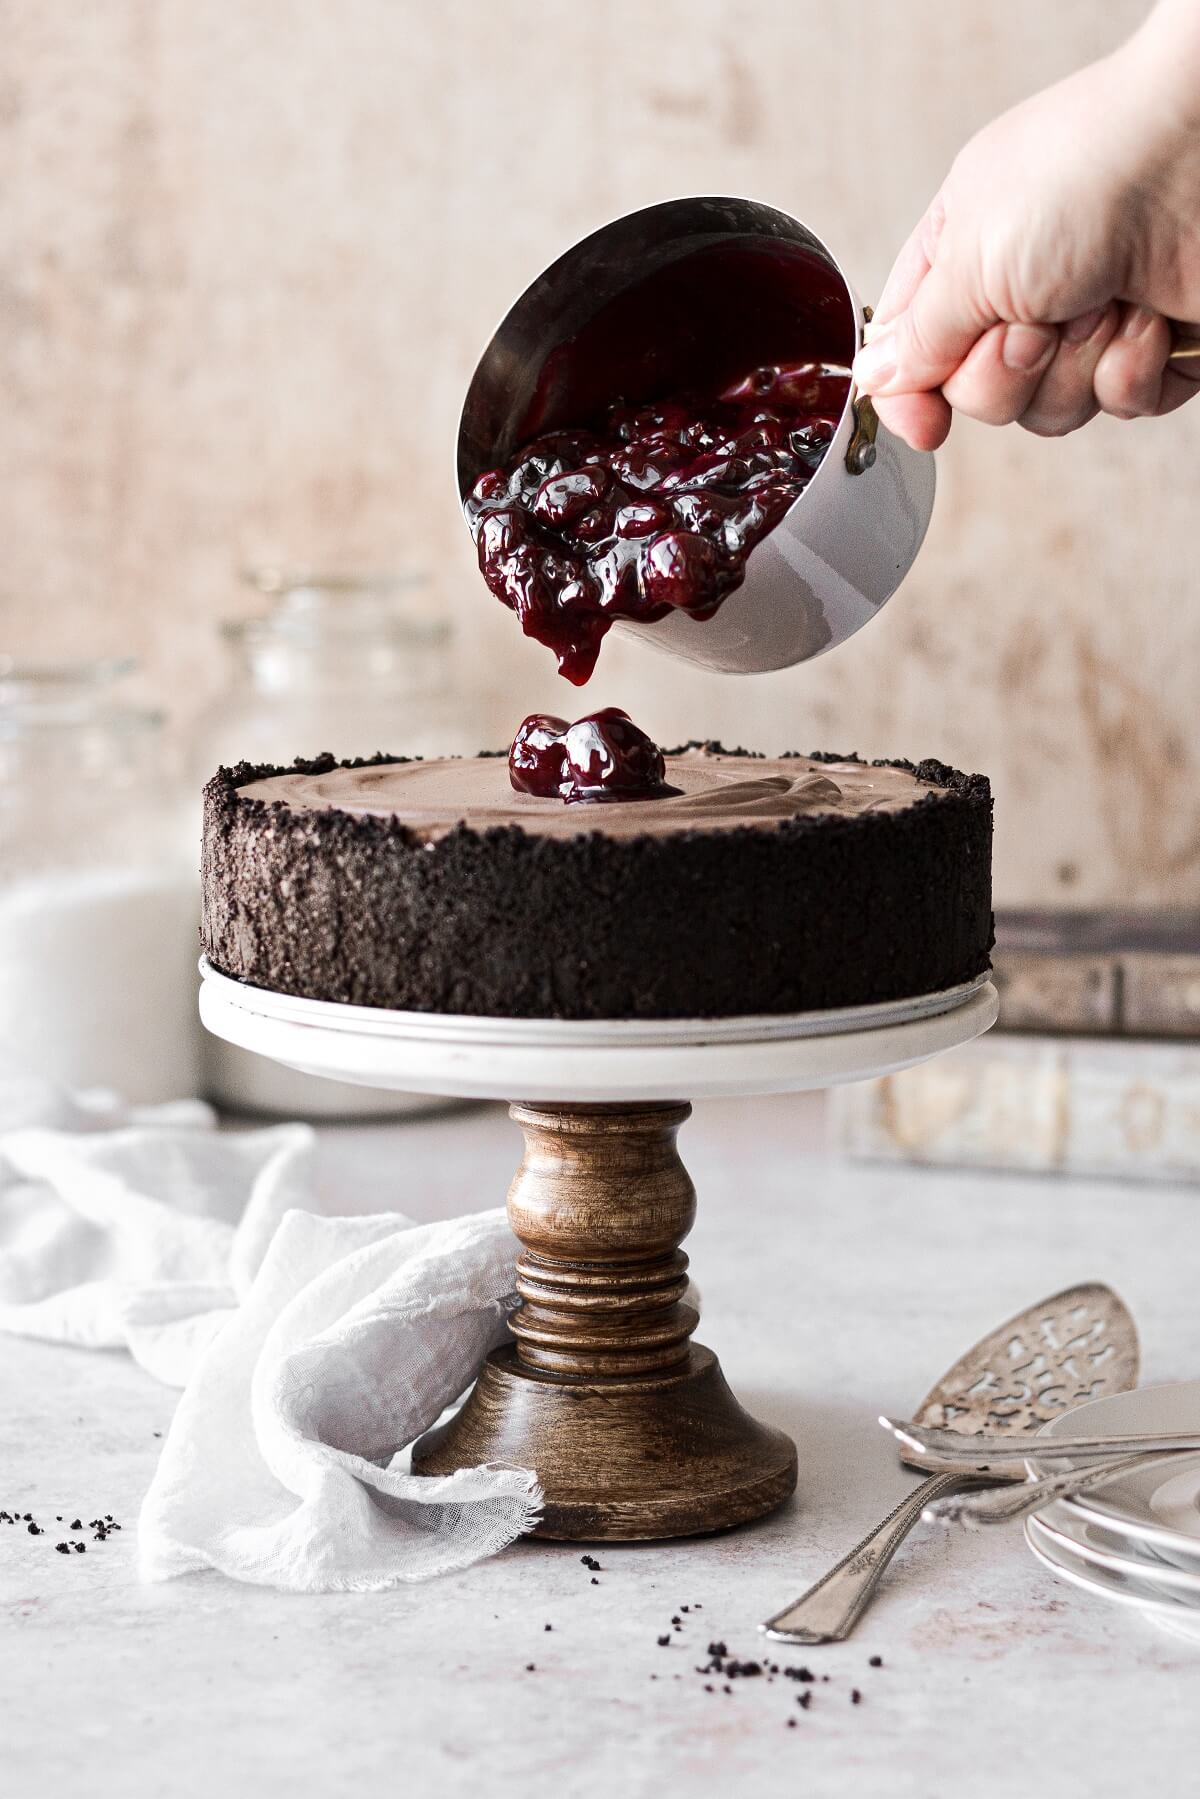 Cherry sauce being poured on top of a chocolate cheesecake.